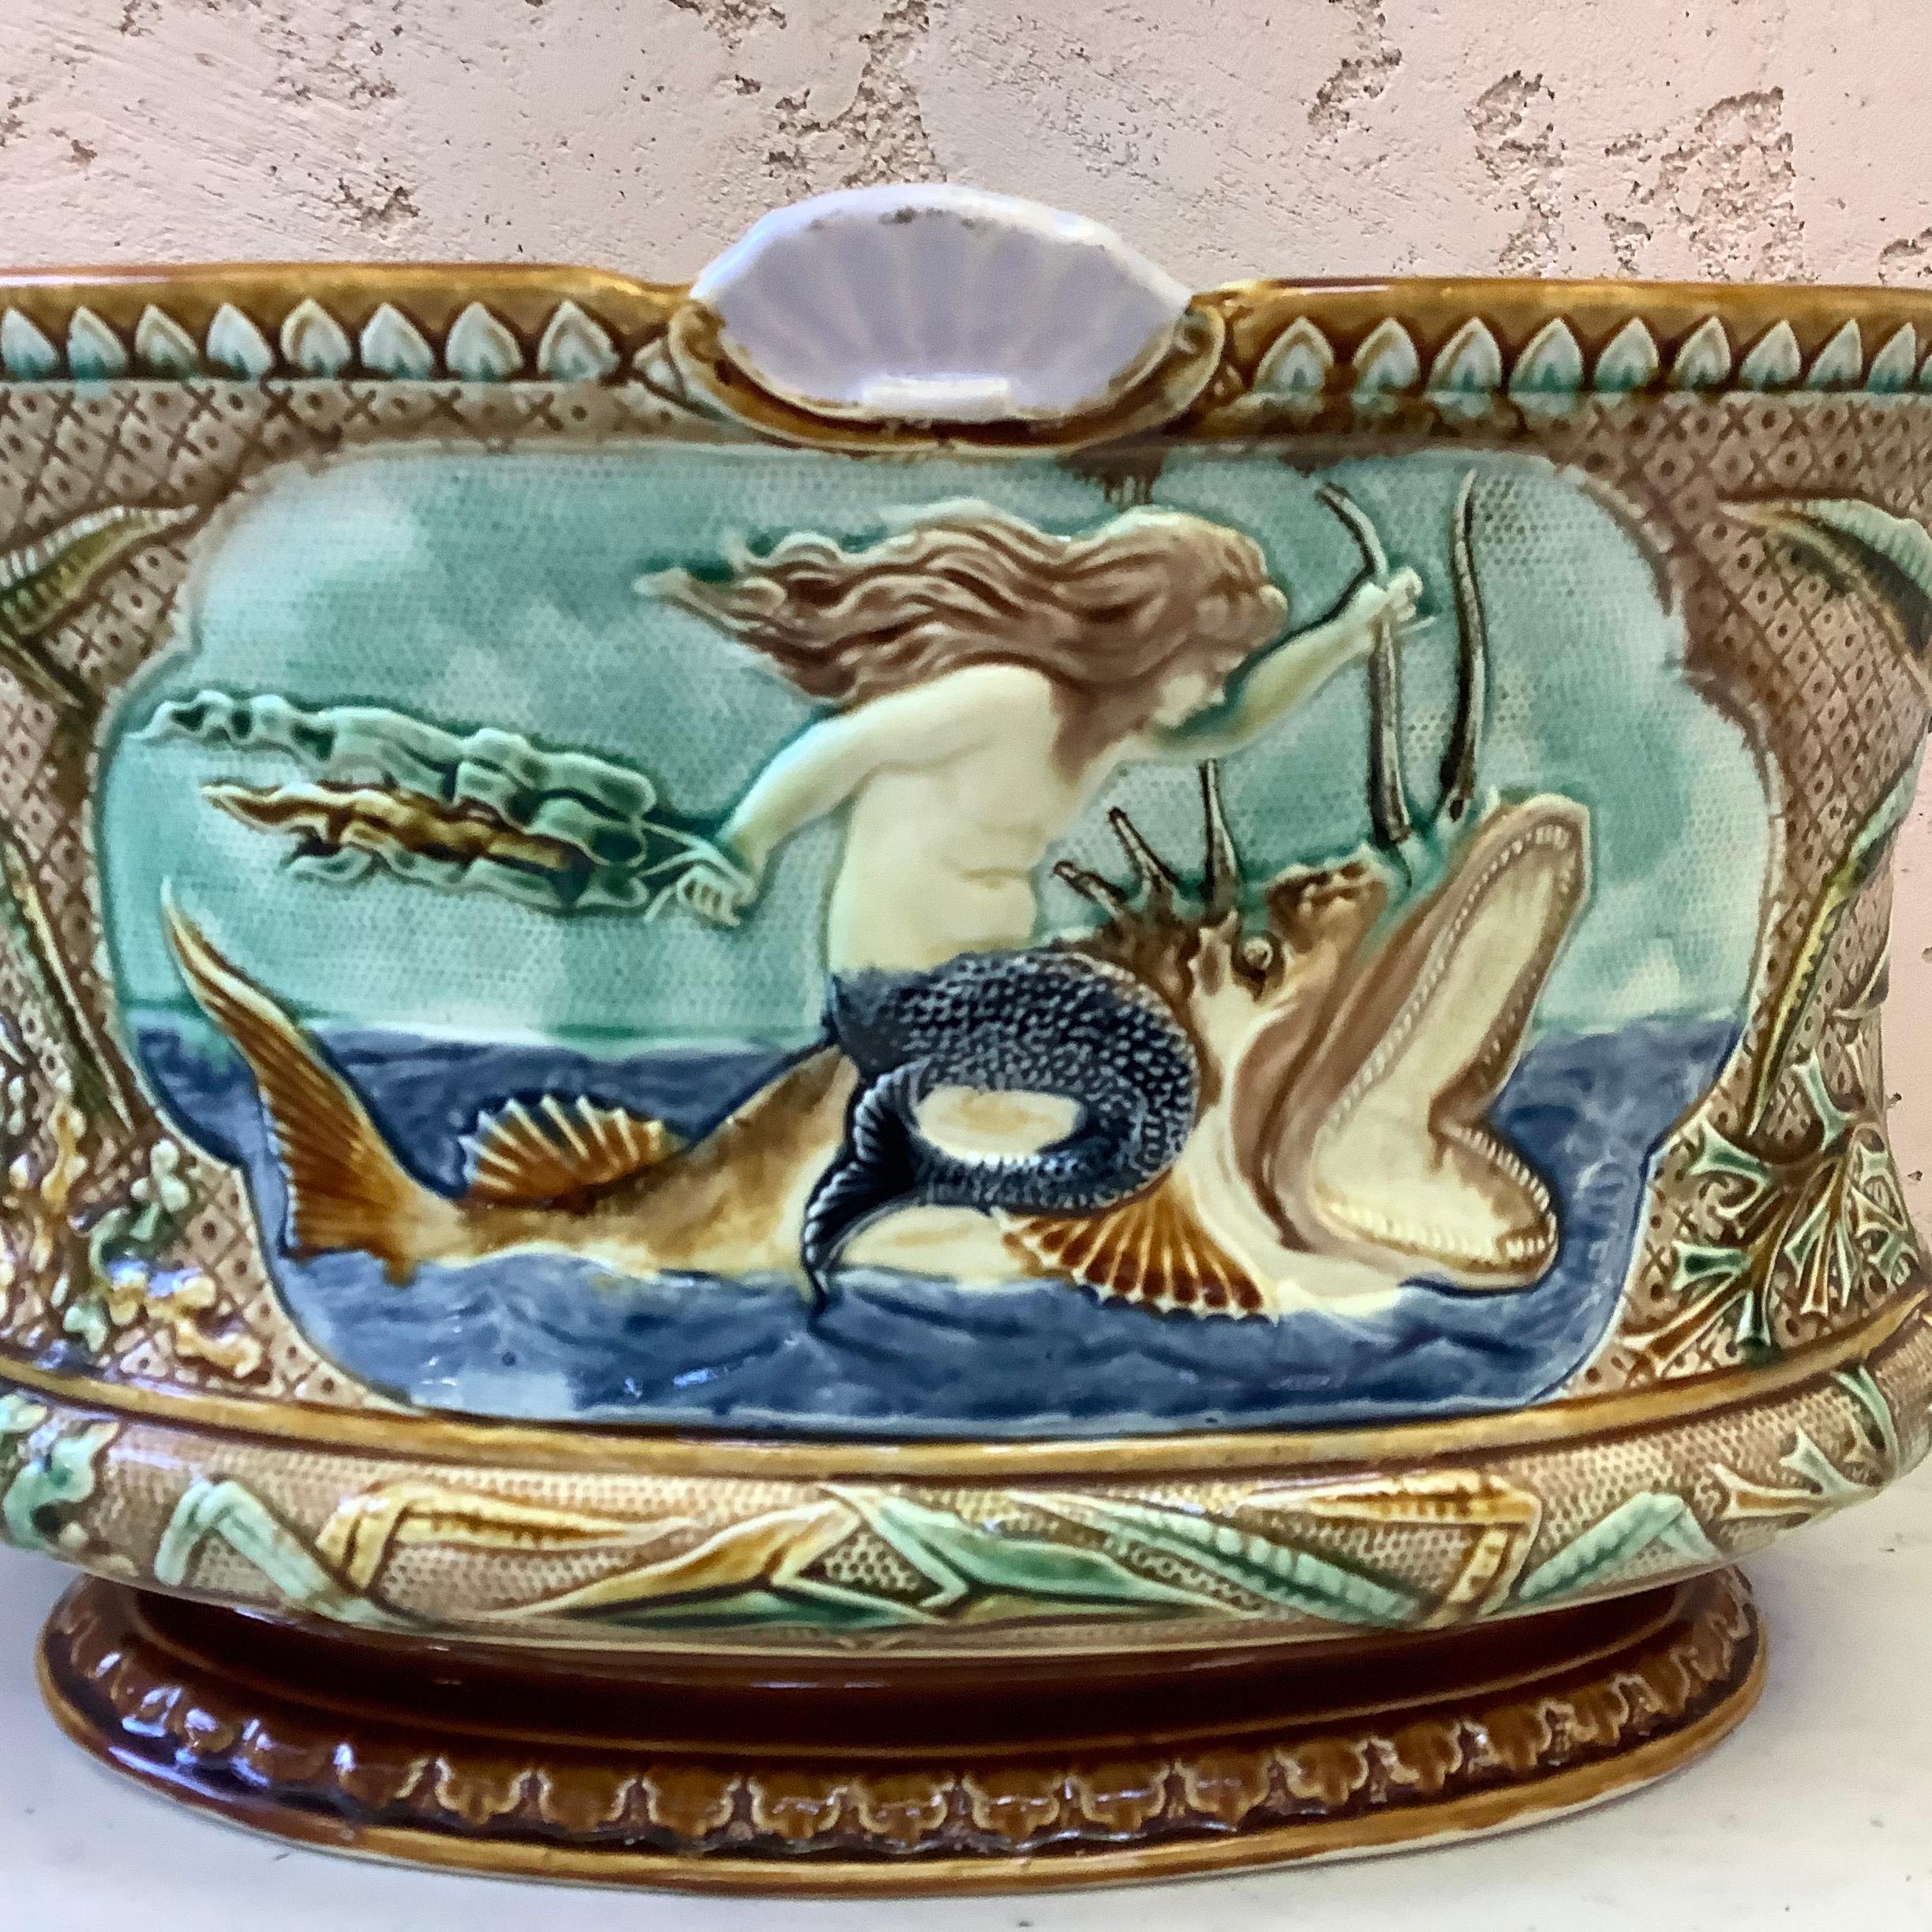 Large unusual Majolica mermaid jardinière, circa 1880.
A mermaid on the top of a large fish with shells and seaweeds.